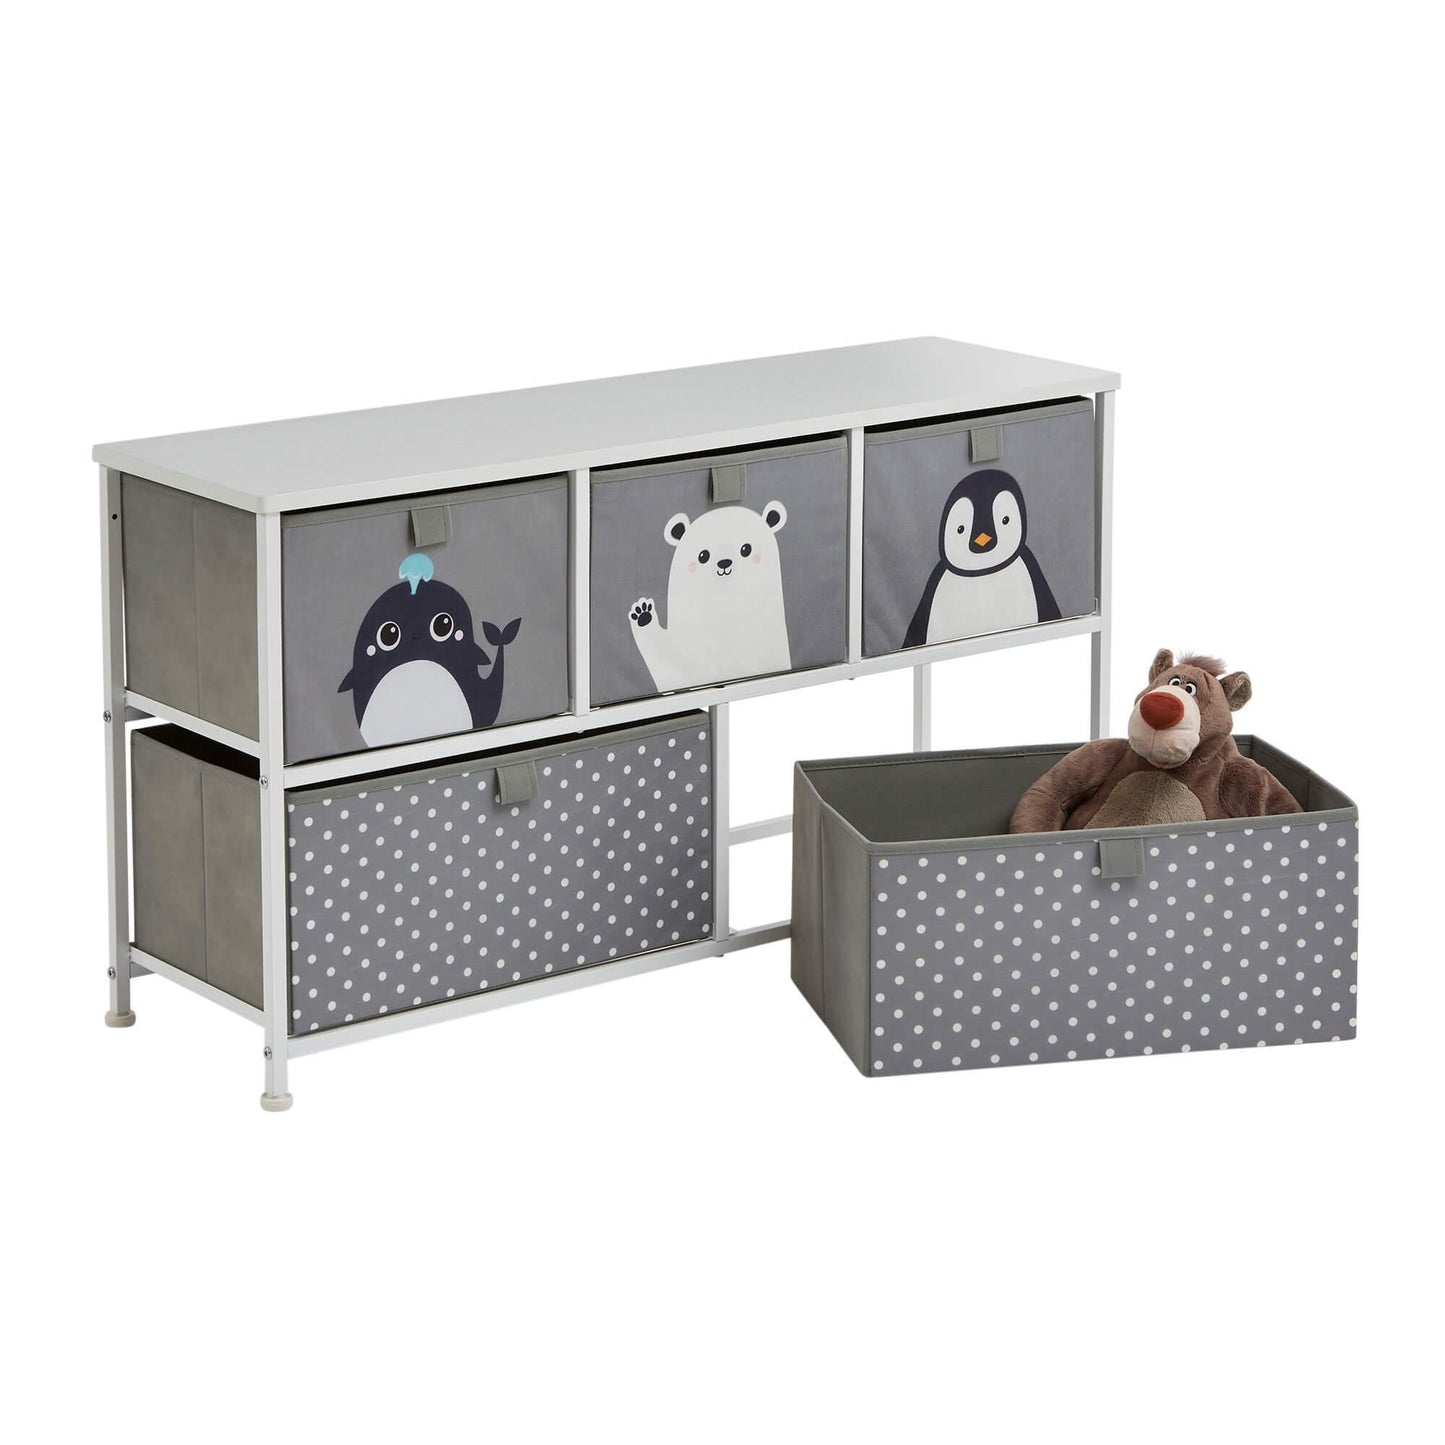 Arctic Animals 5 Drawer Kids Storage Chest Bench Seat - Grey White - Home Inspired Gifts